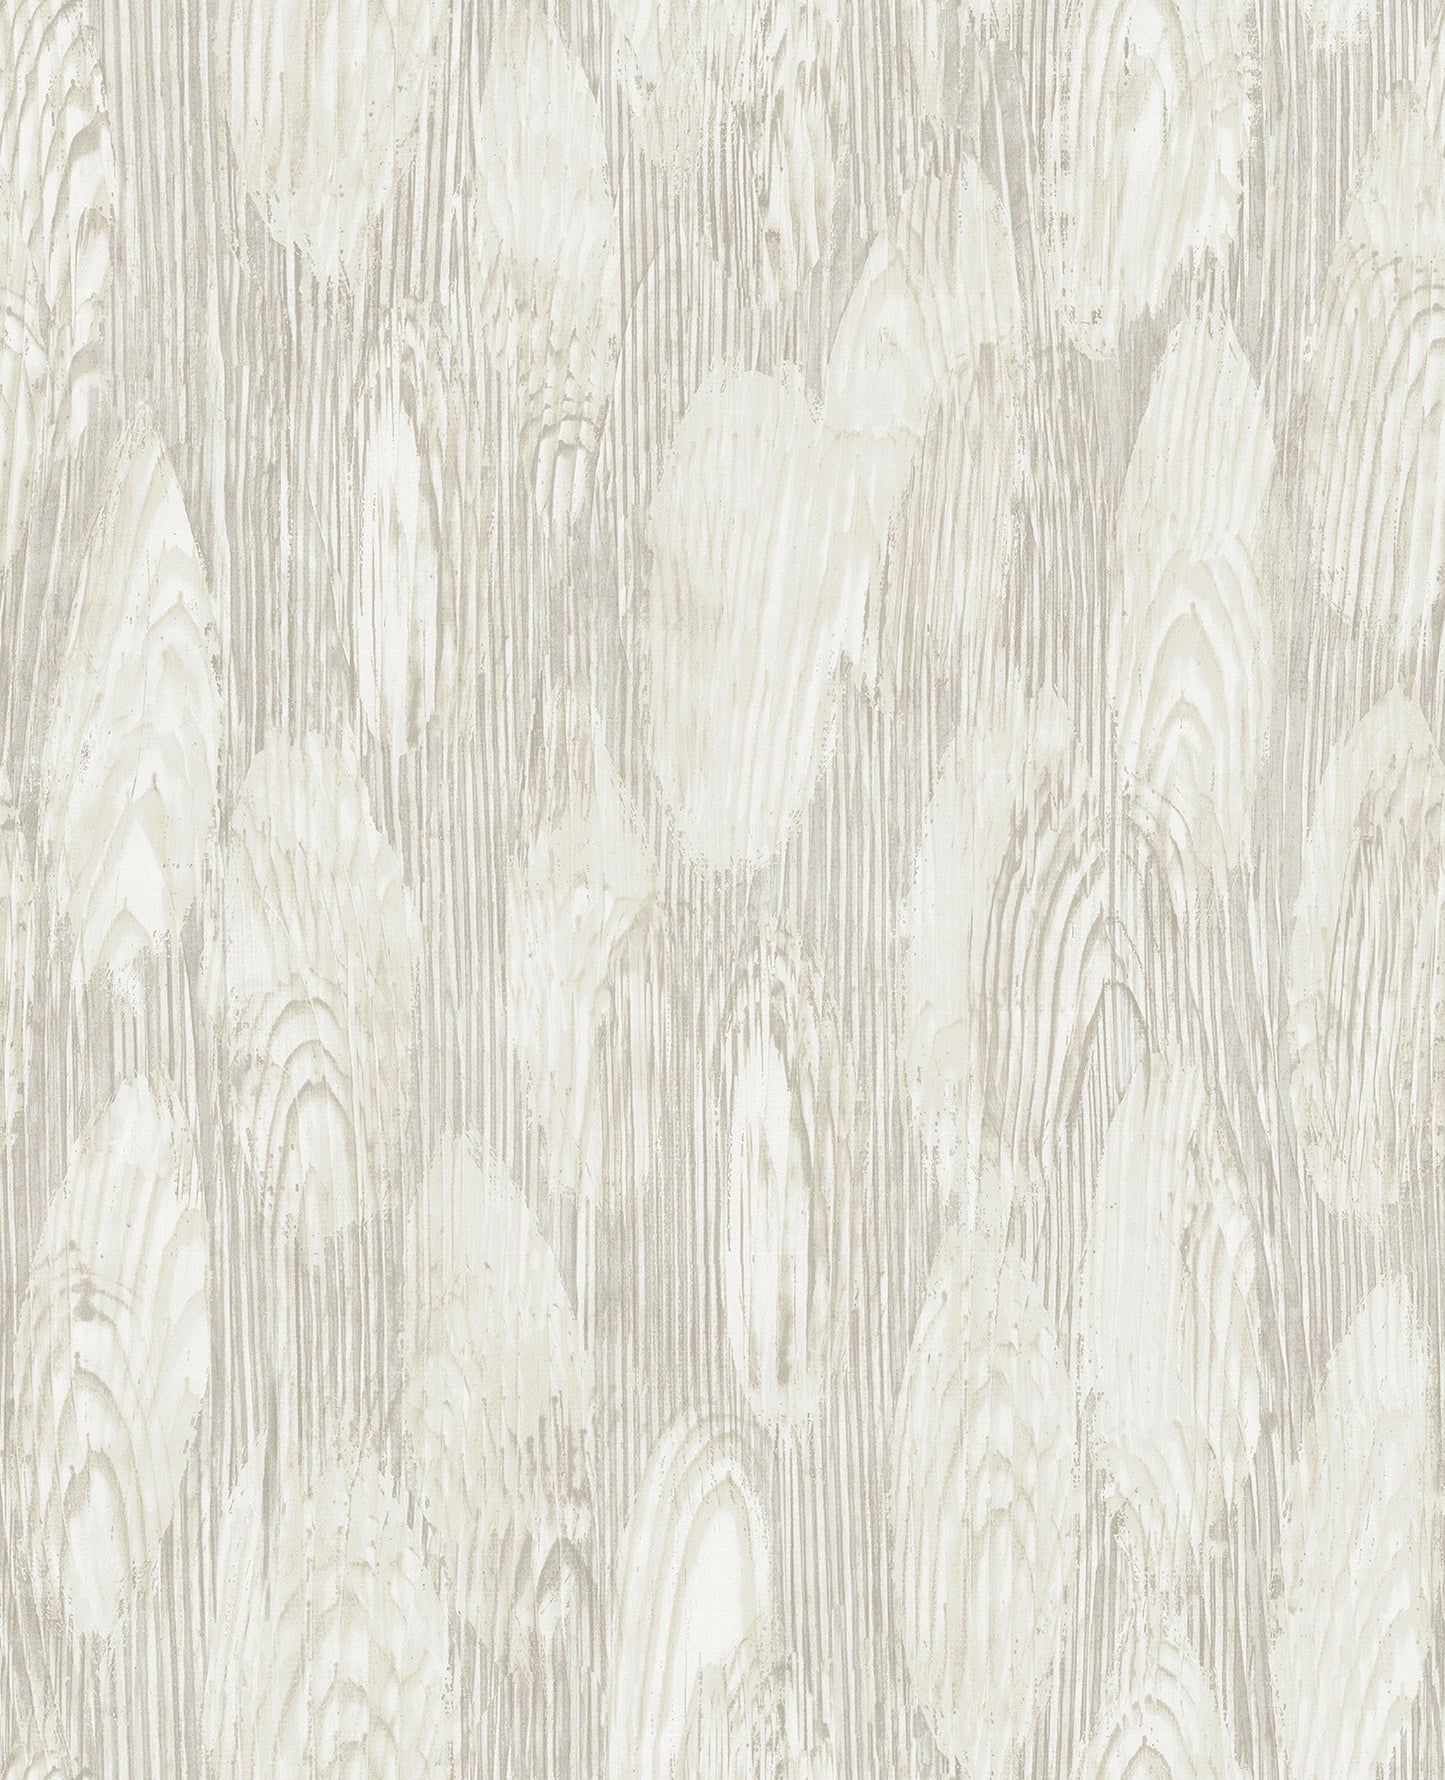 Order 2908 87119 Alchemy Monolith Silver Abstract Wood A Street Prints Wallpaper